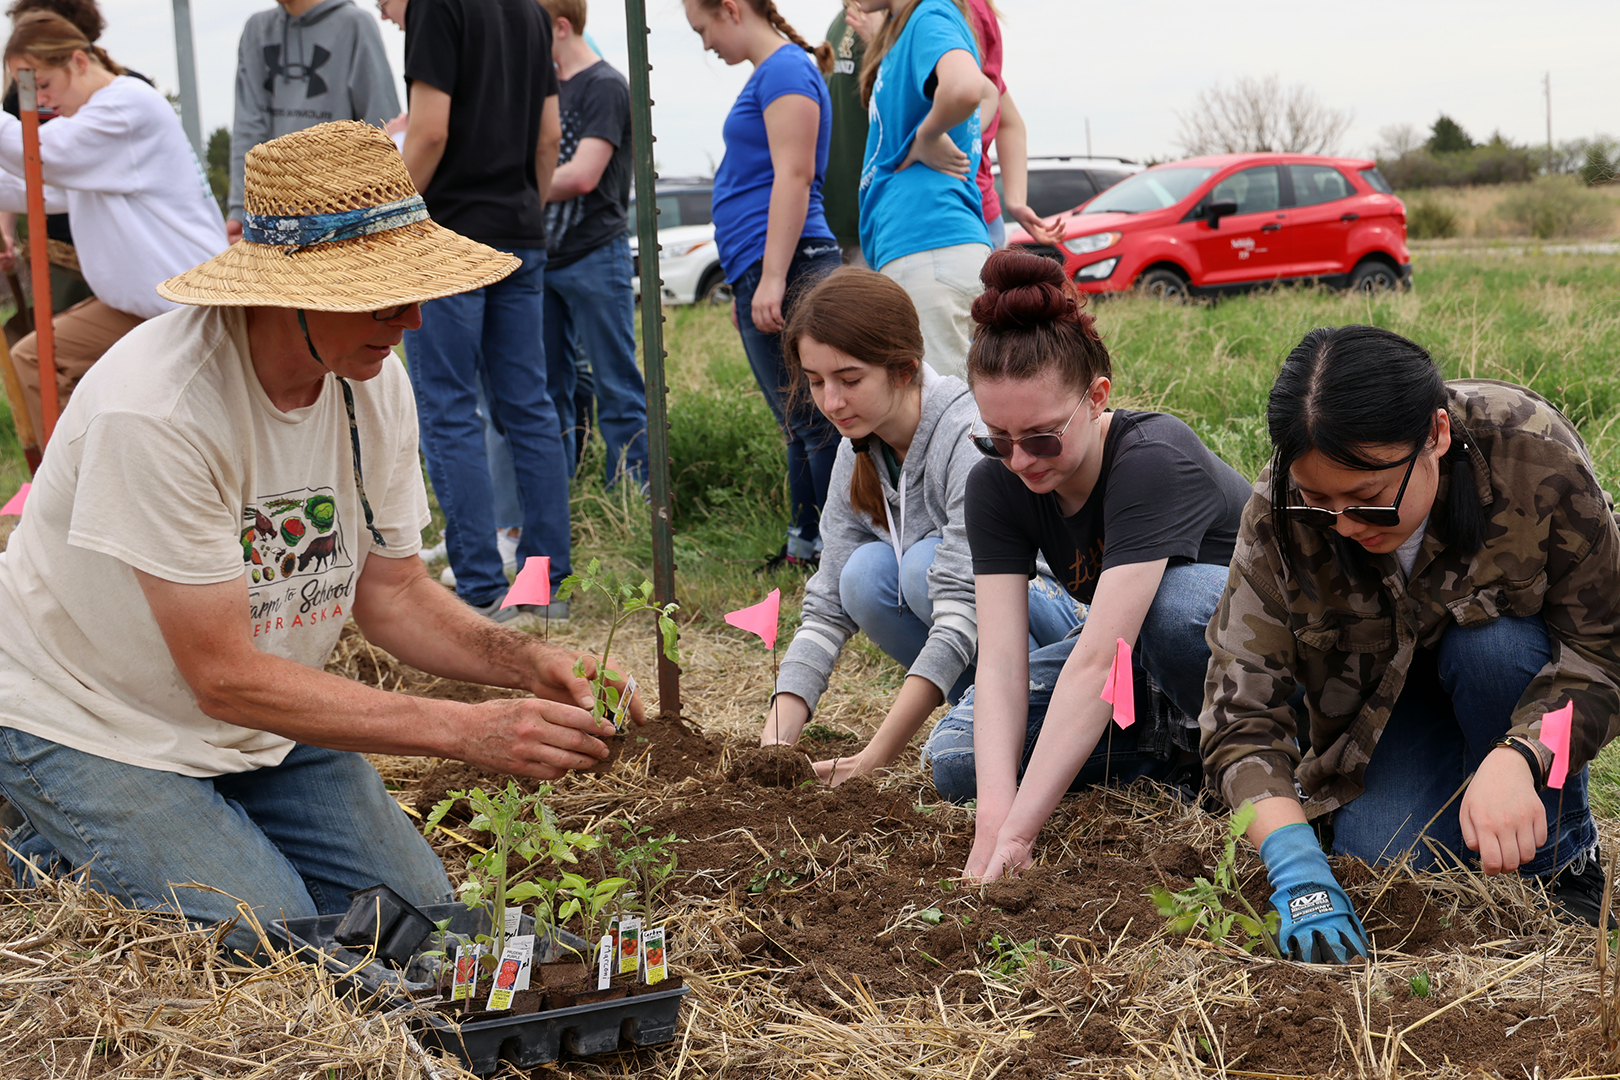 Gary Fehr shows Pius X High School students how to plant vegetables at Green School Farms in Raymond, Neb.